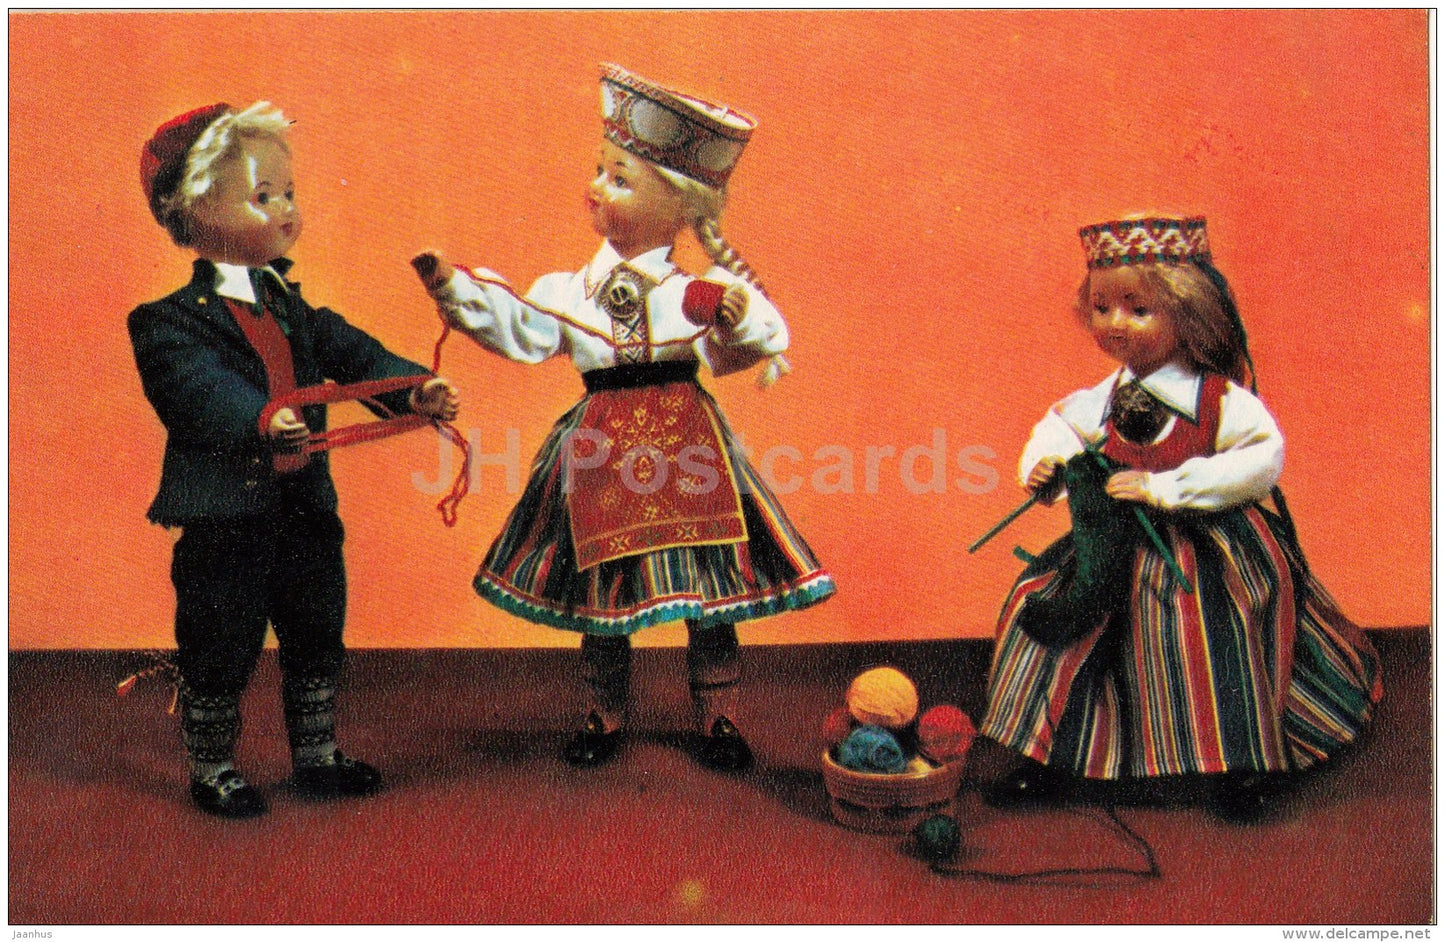 On an evening - knitting - dolls in Estonian national costumes - 1967 - Russia USSR - unused - JH Postcards